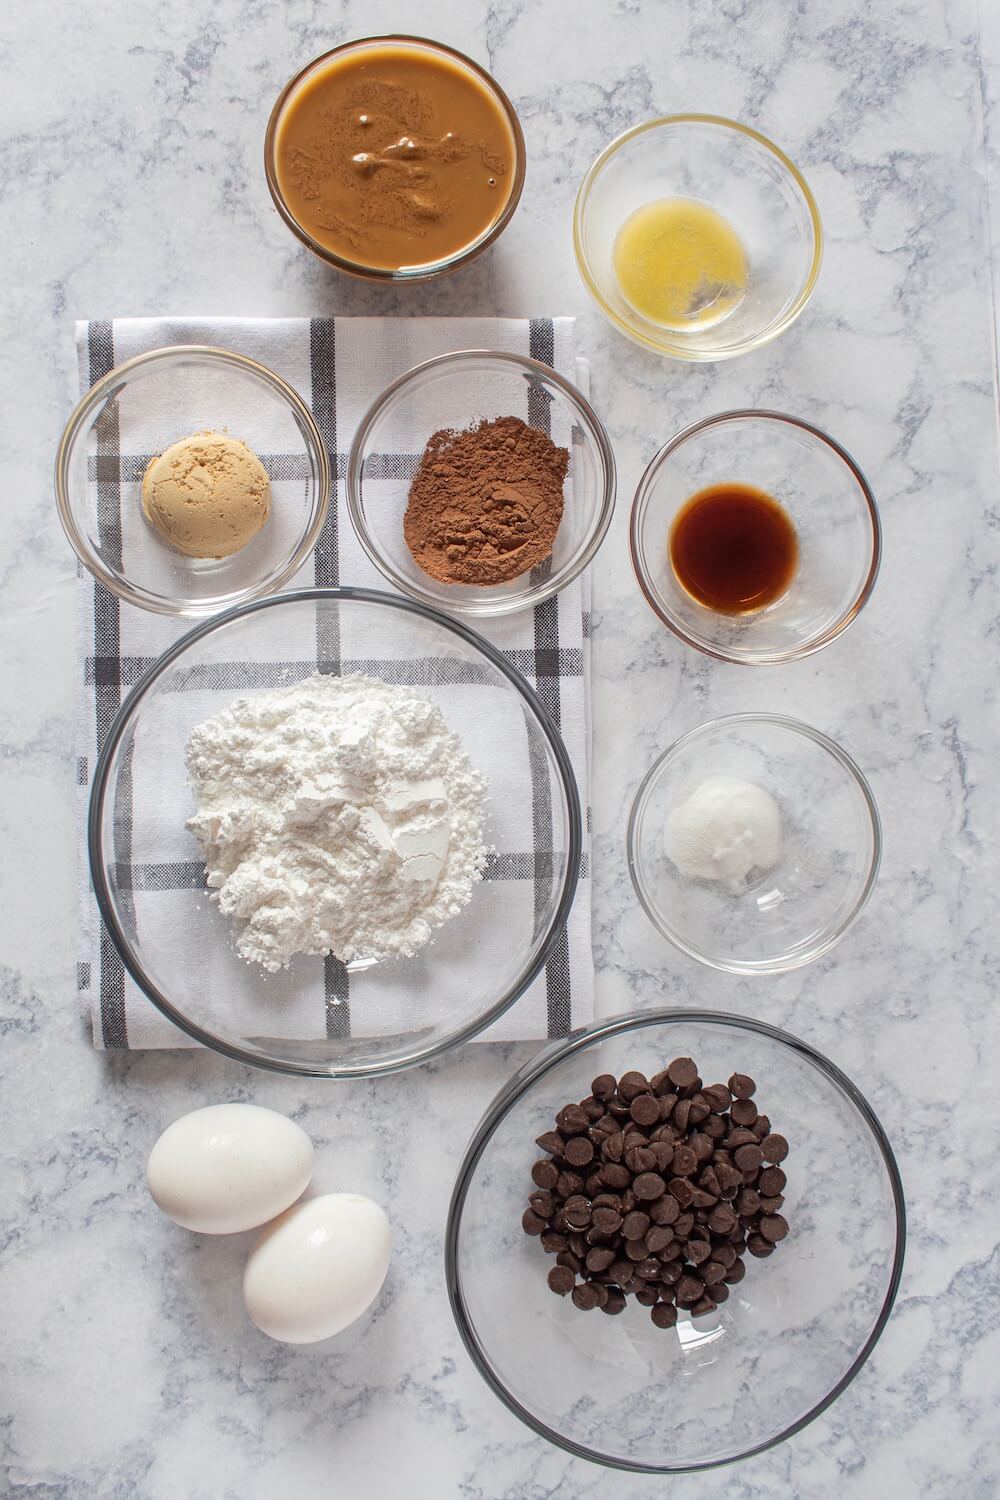 All ingredients for these keto double chocolate chip cookies laid out on the counter